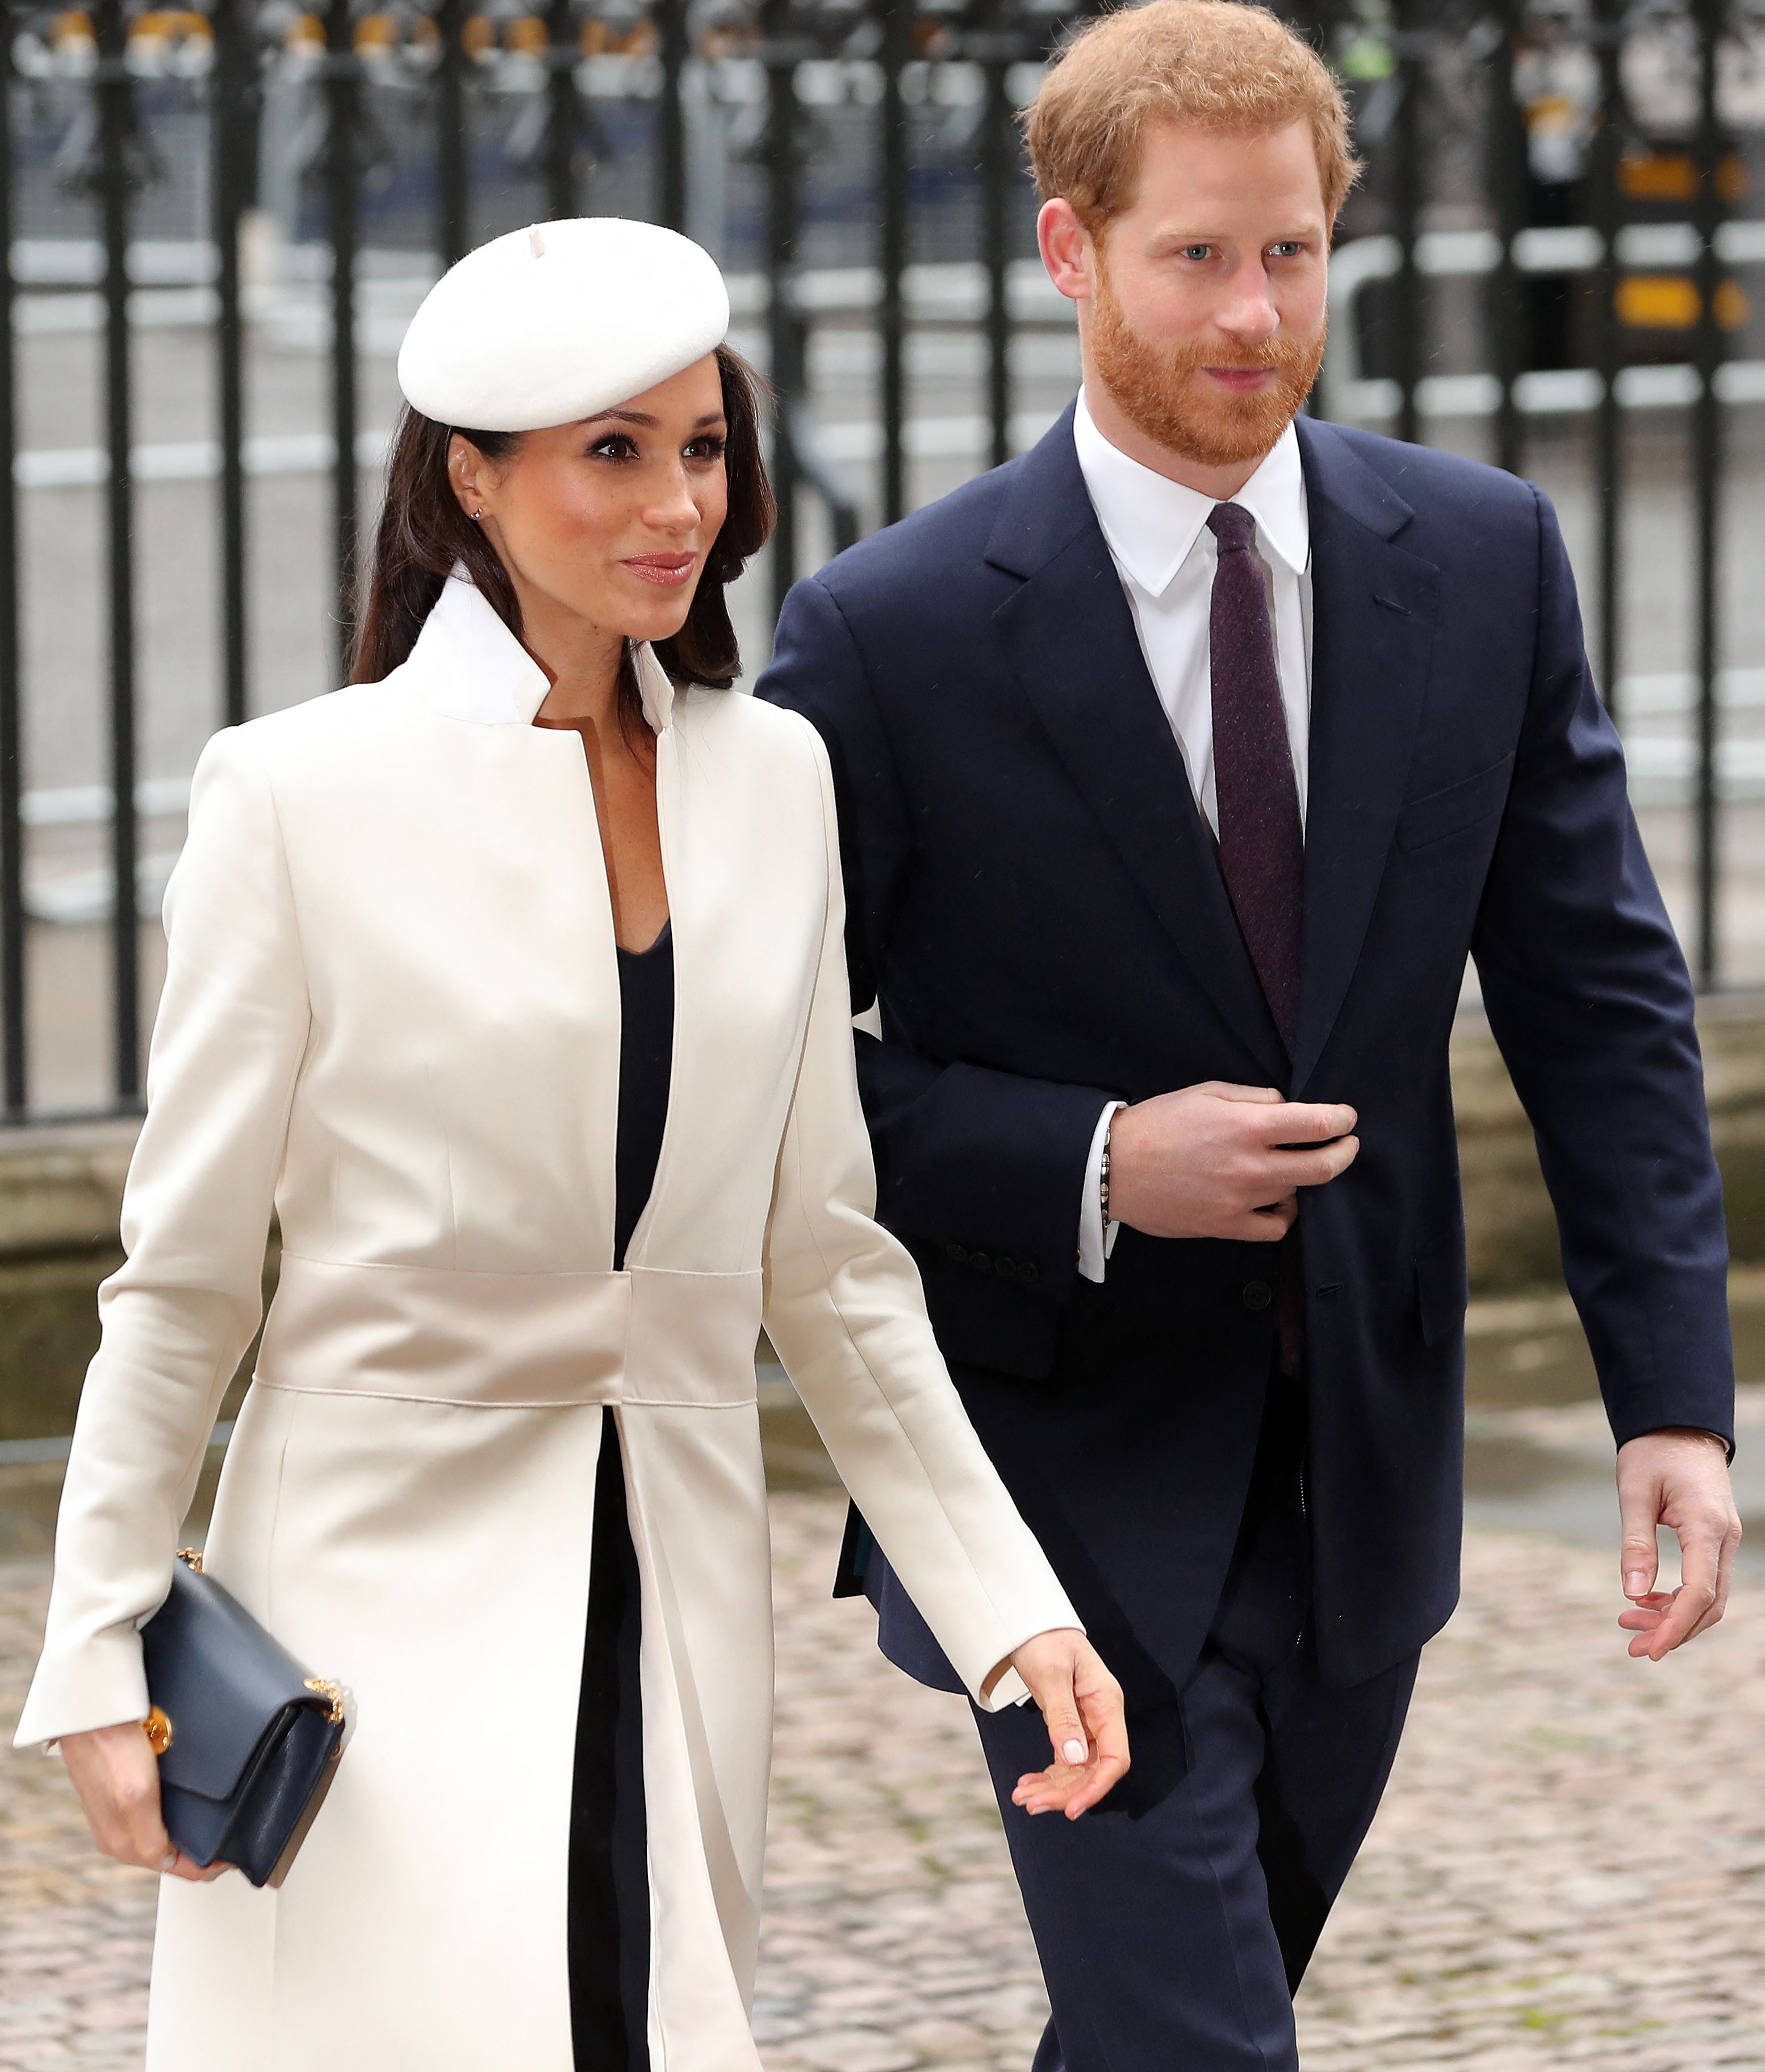 Britain's Prince Harry and Meghan Markle attended a Commonwealth Day Service at Westminster Abbey in central London on March 12, 2018. | Source: Getty Images